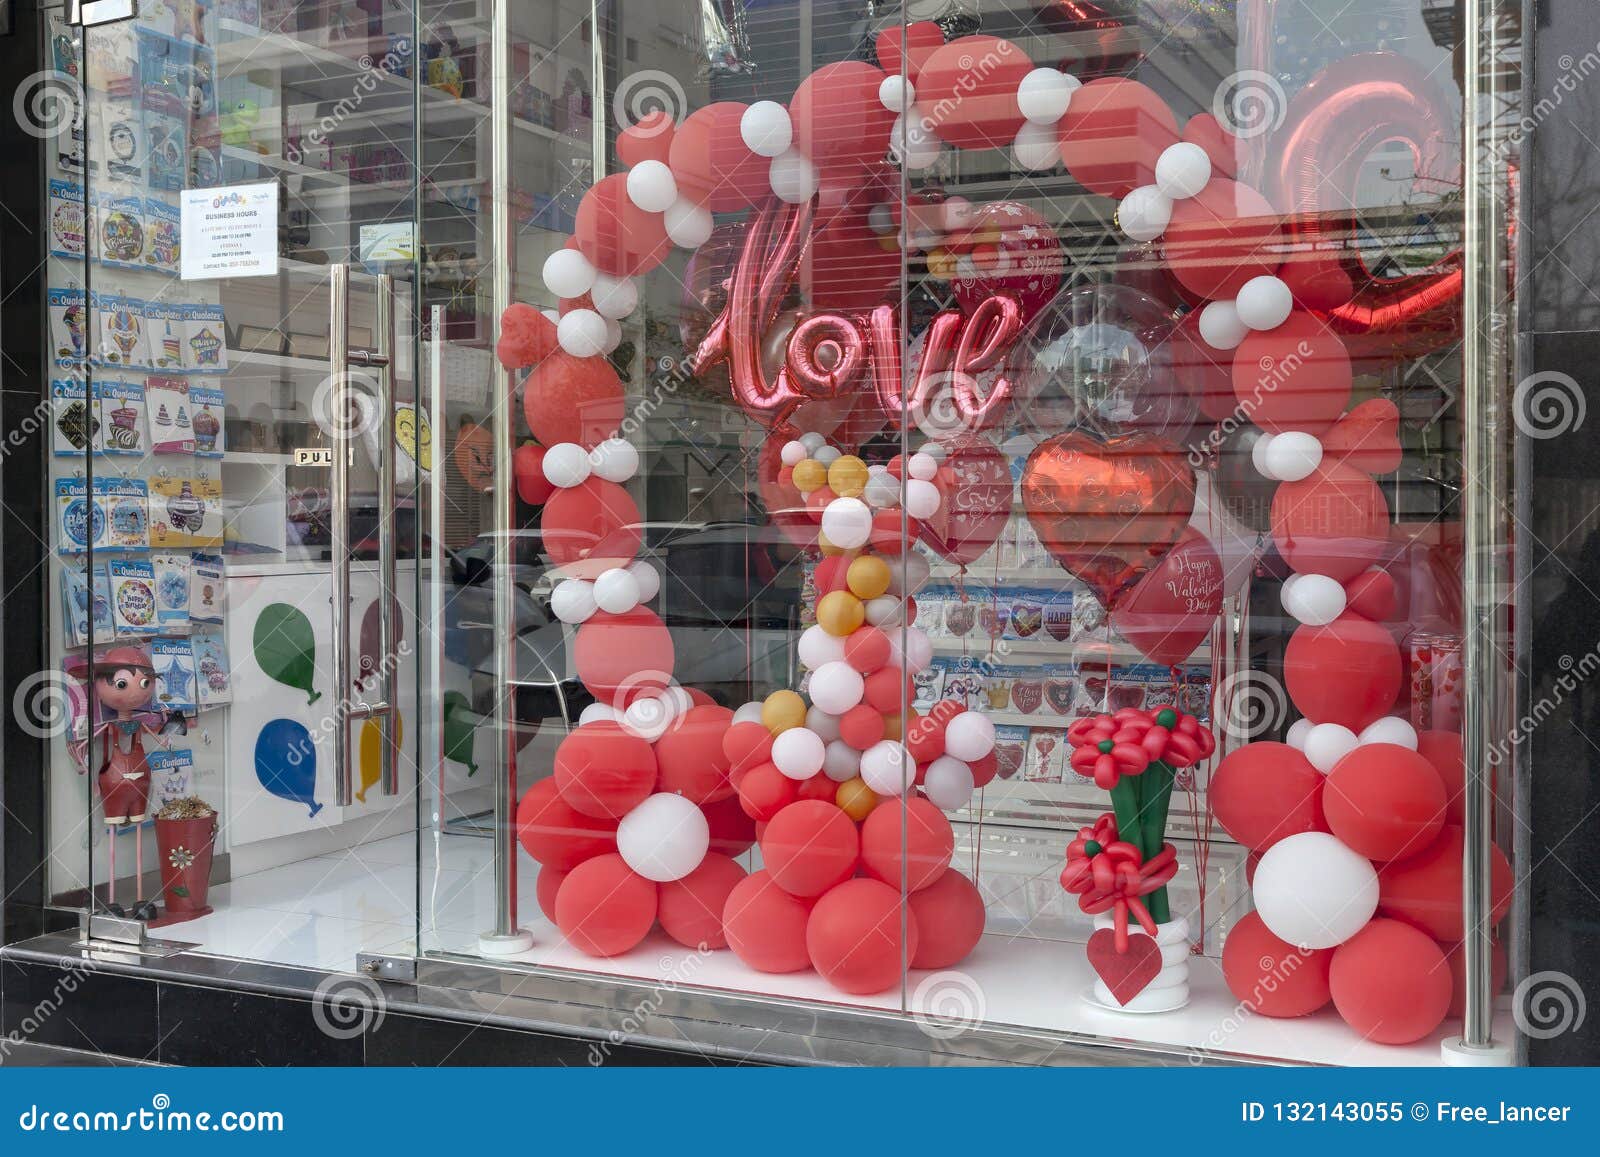 St Valentin COEURS SIGNE Retail Shop Window Display Wall Stickers Decals A334